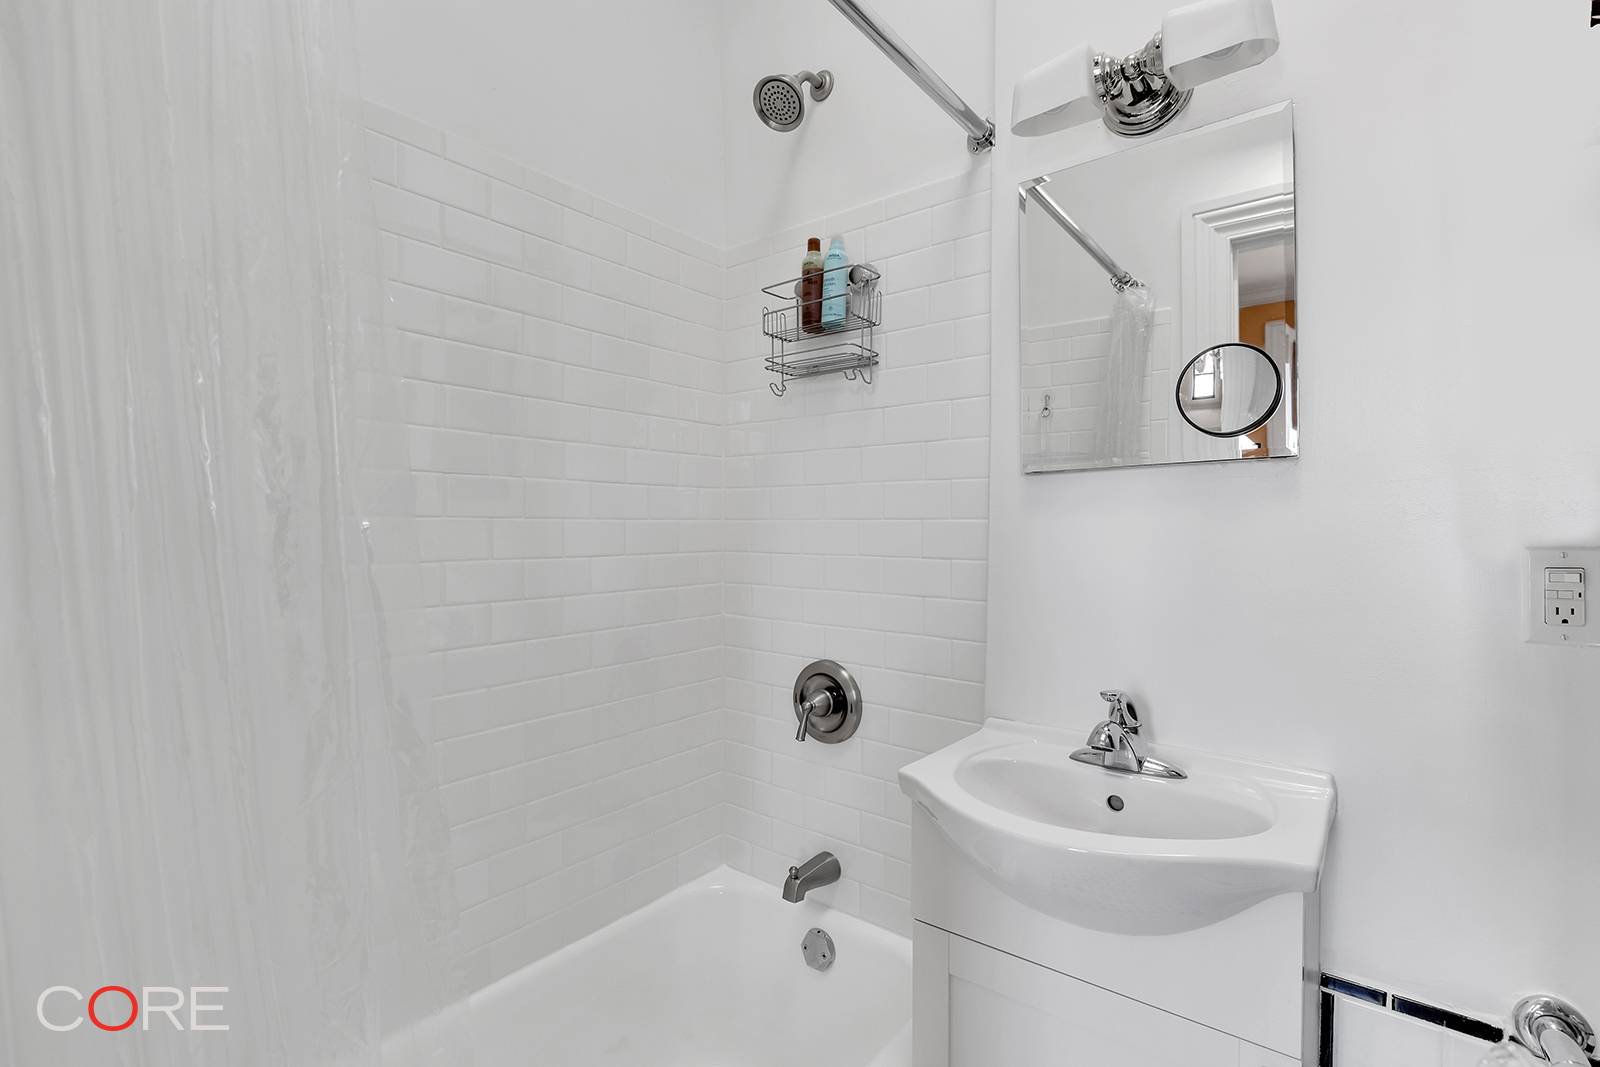 Relax in this sunny and cheerful studio in the historic and charming heart of the West Village.